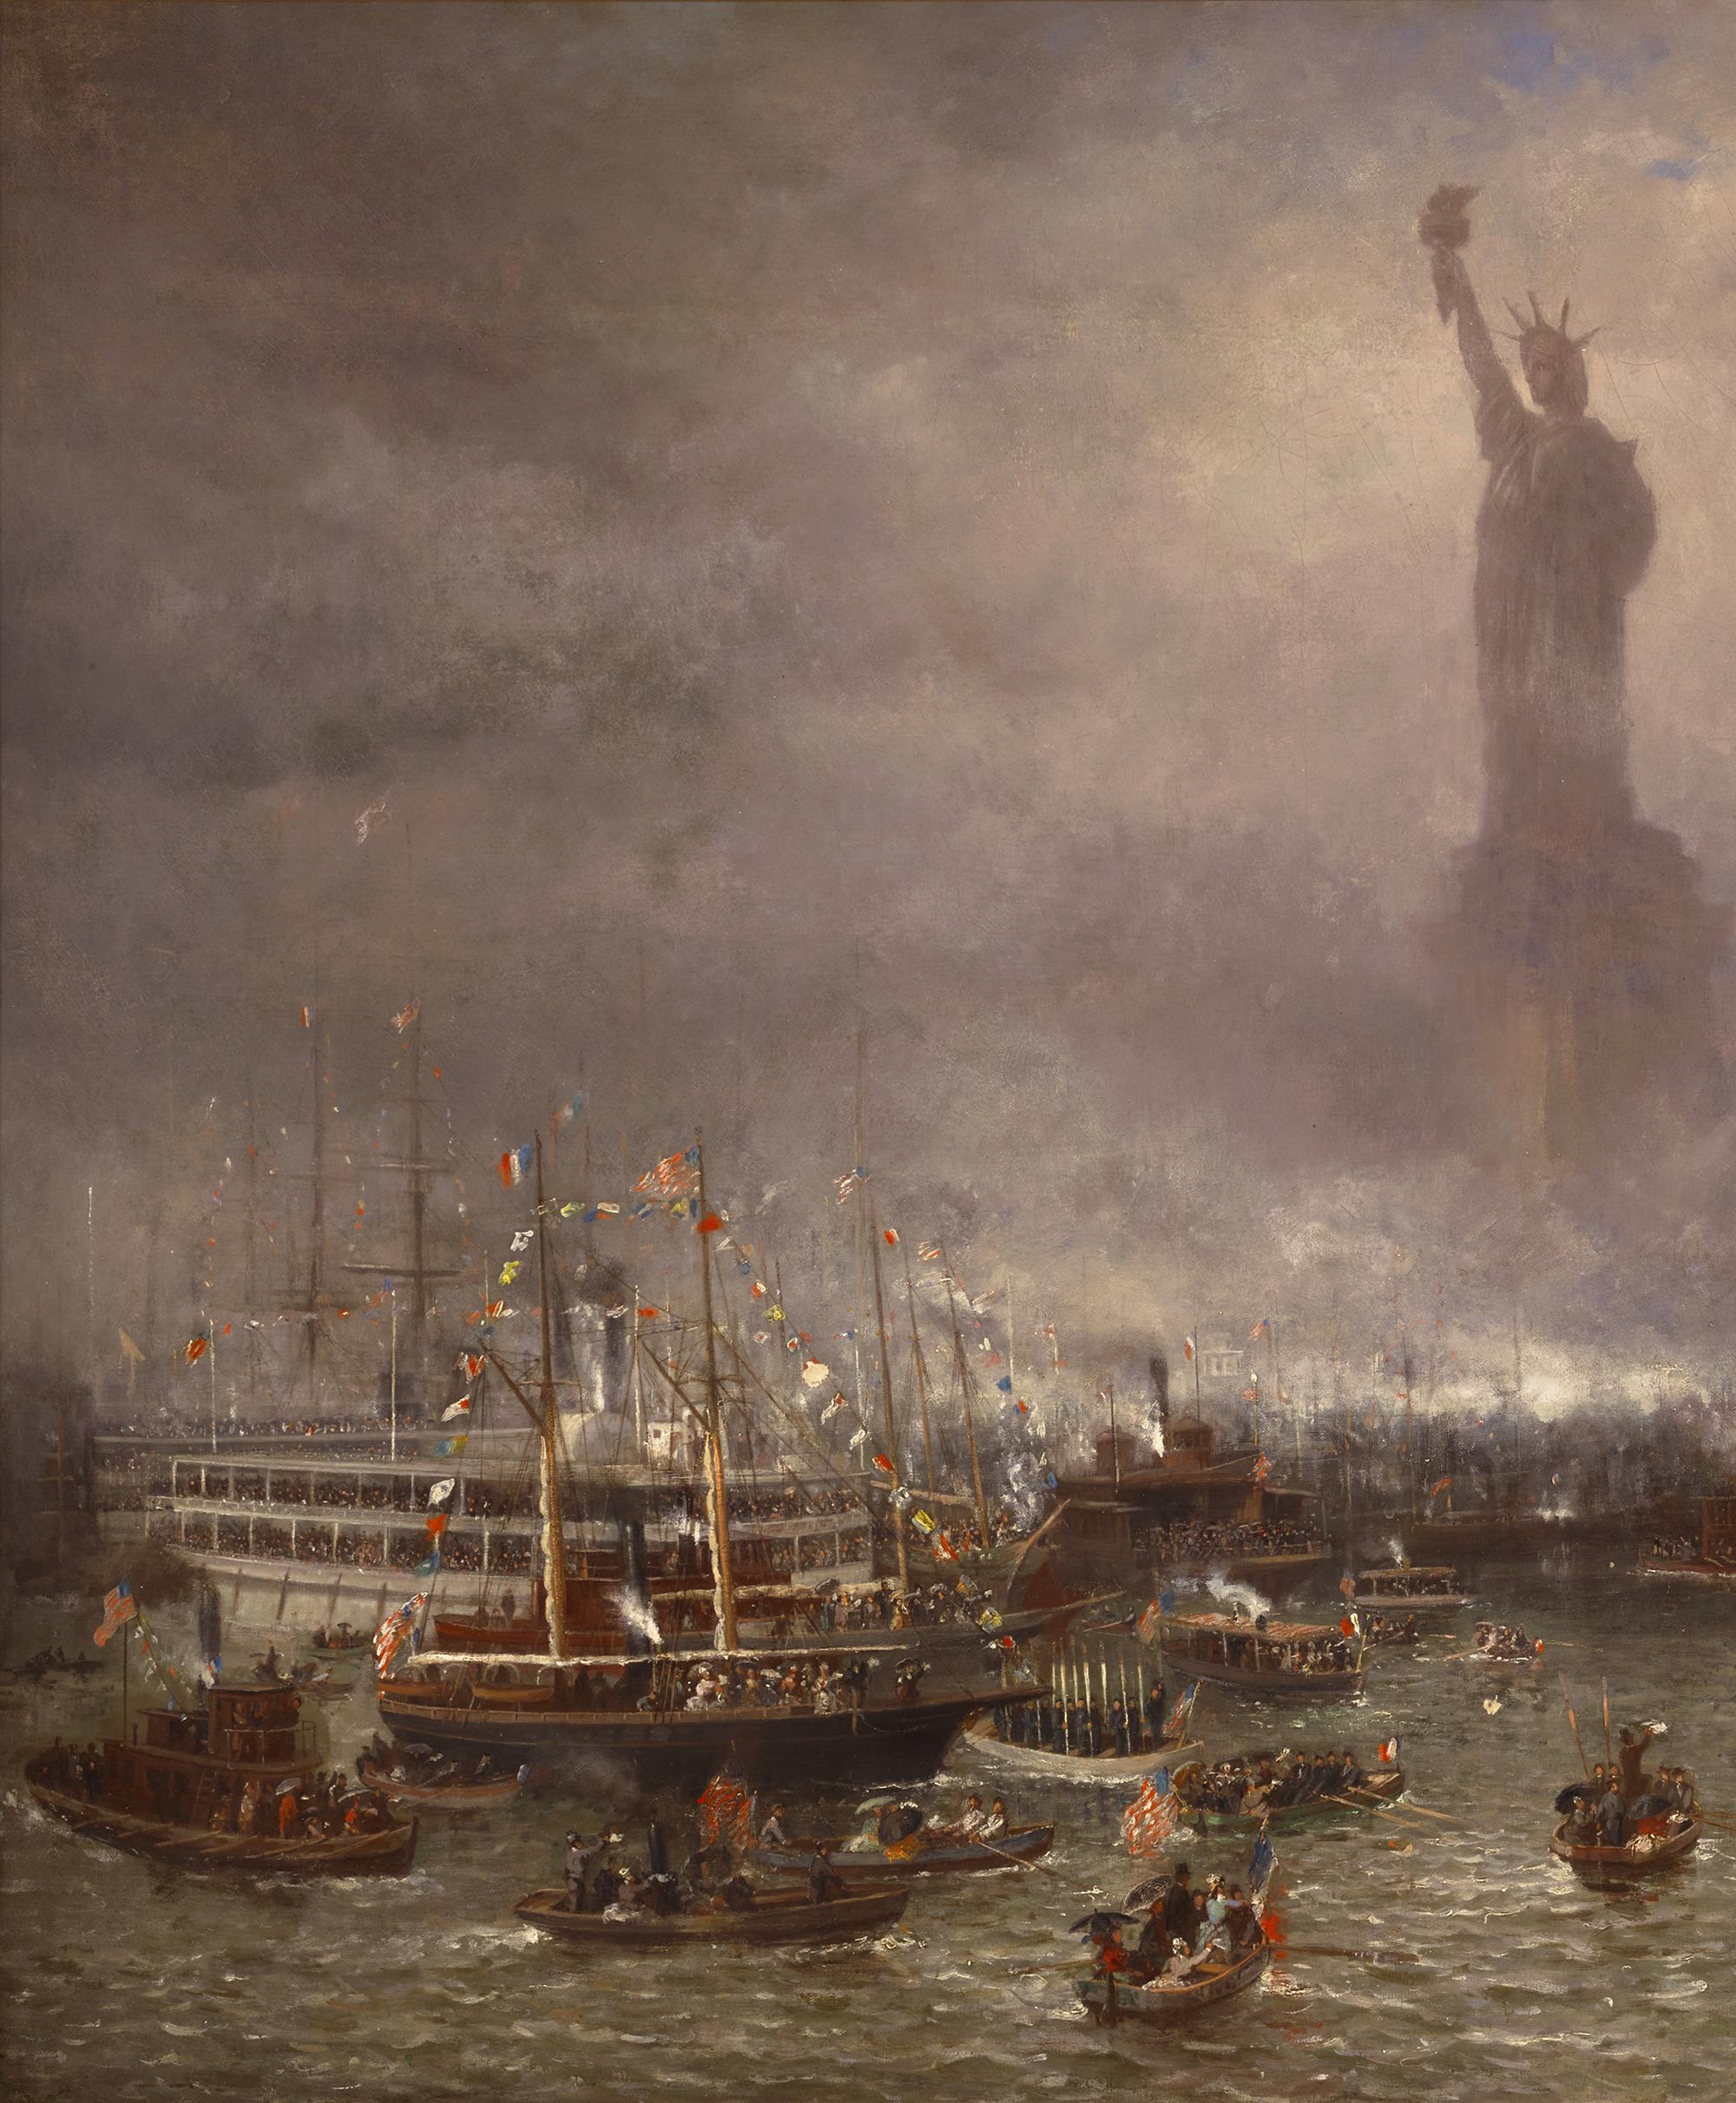 Statue Of Liberty Celebration, October 28, 1886 By Frederic Rondel - Post-Impressionist Painting by Frederick Rondel